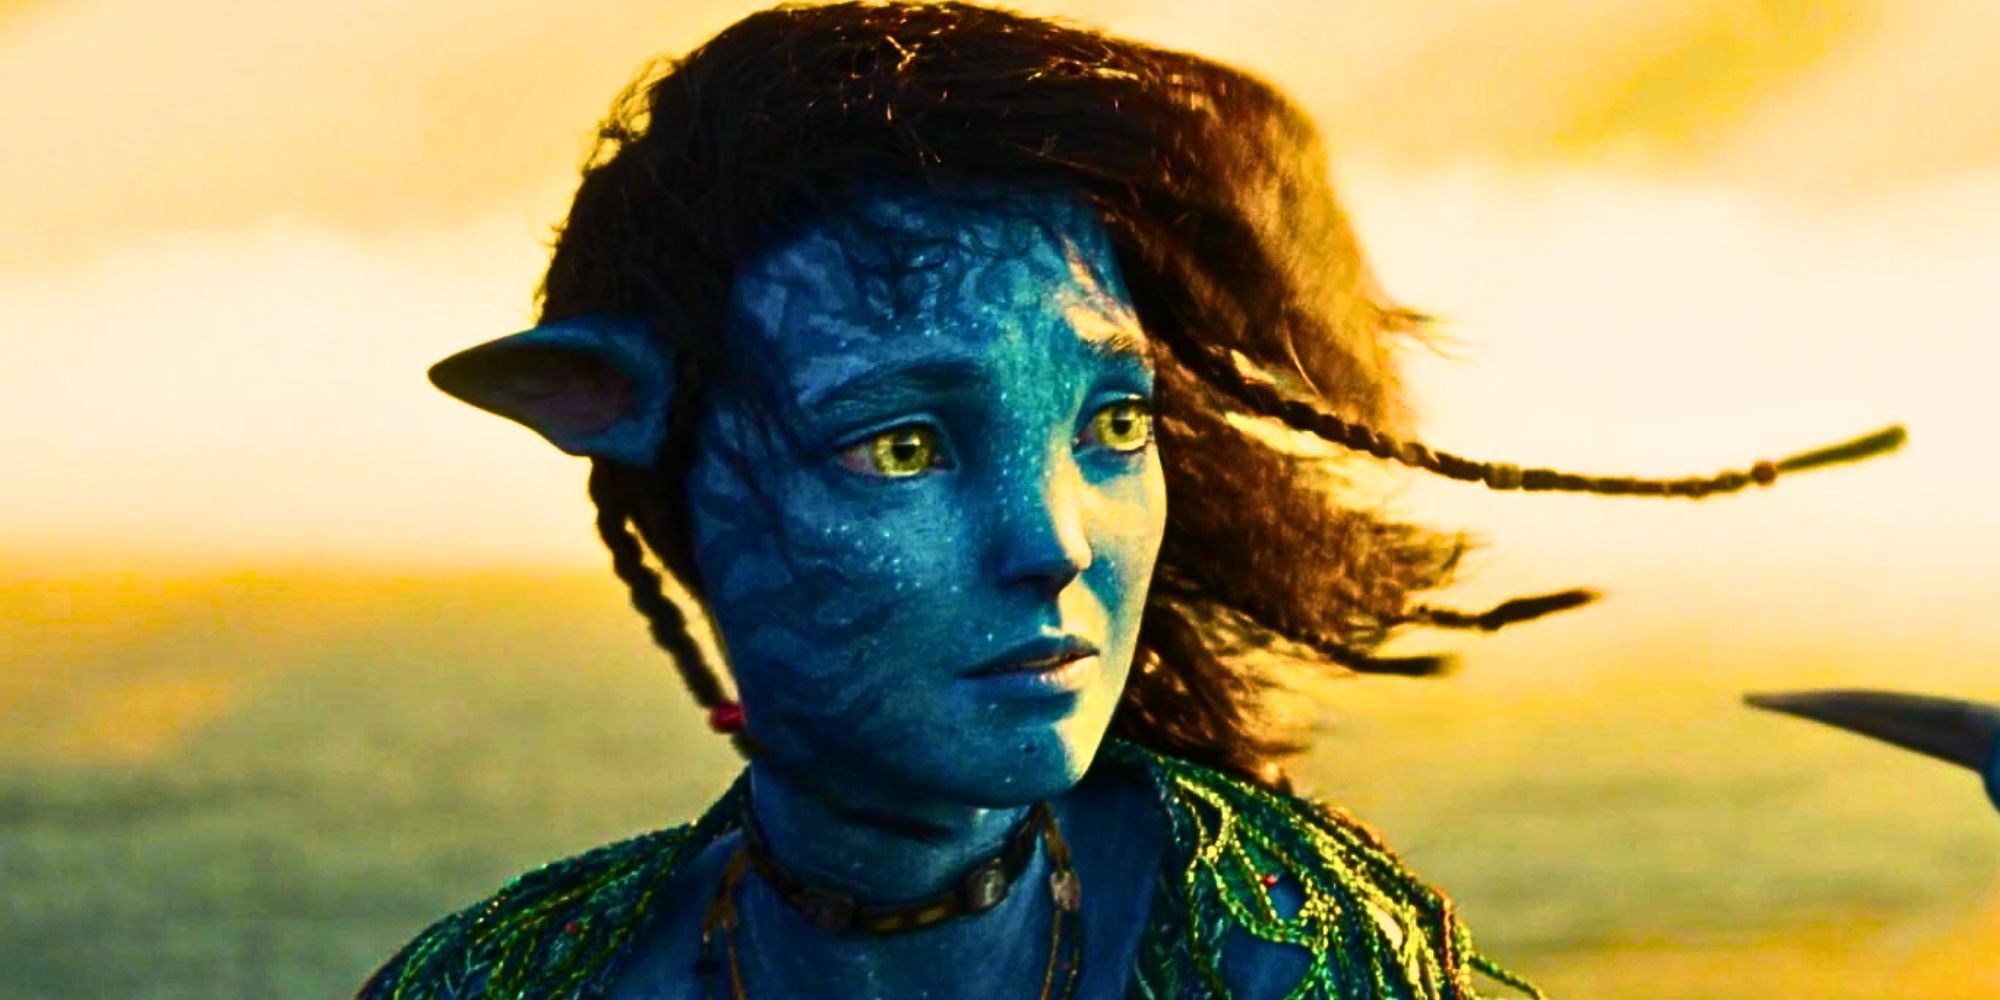 7 Clues To Jake Sully’s Replacement In Avatar 3 After The Way Of Water Setup